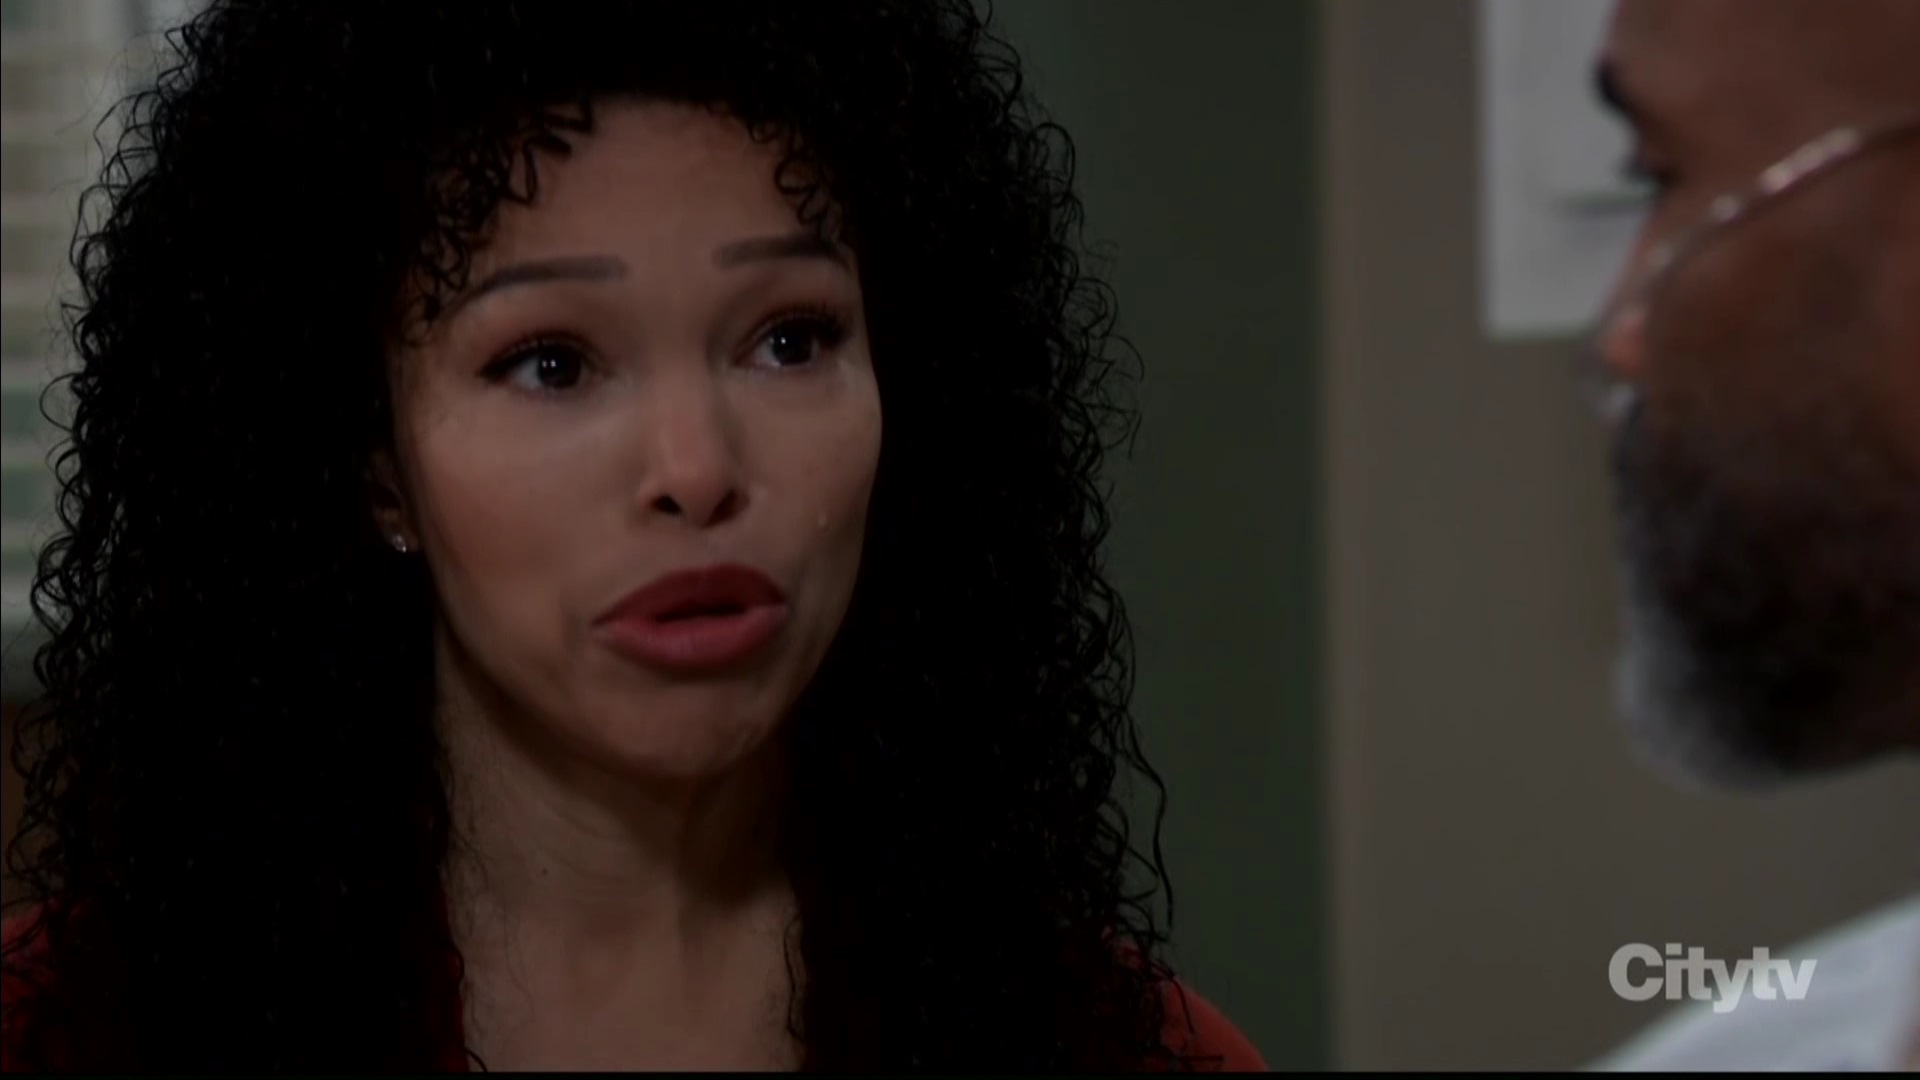 portia cries telling curtis he's paralyzed for good